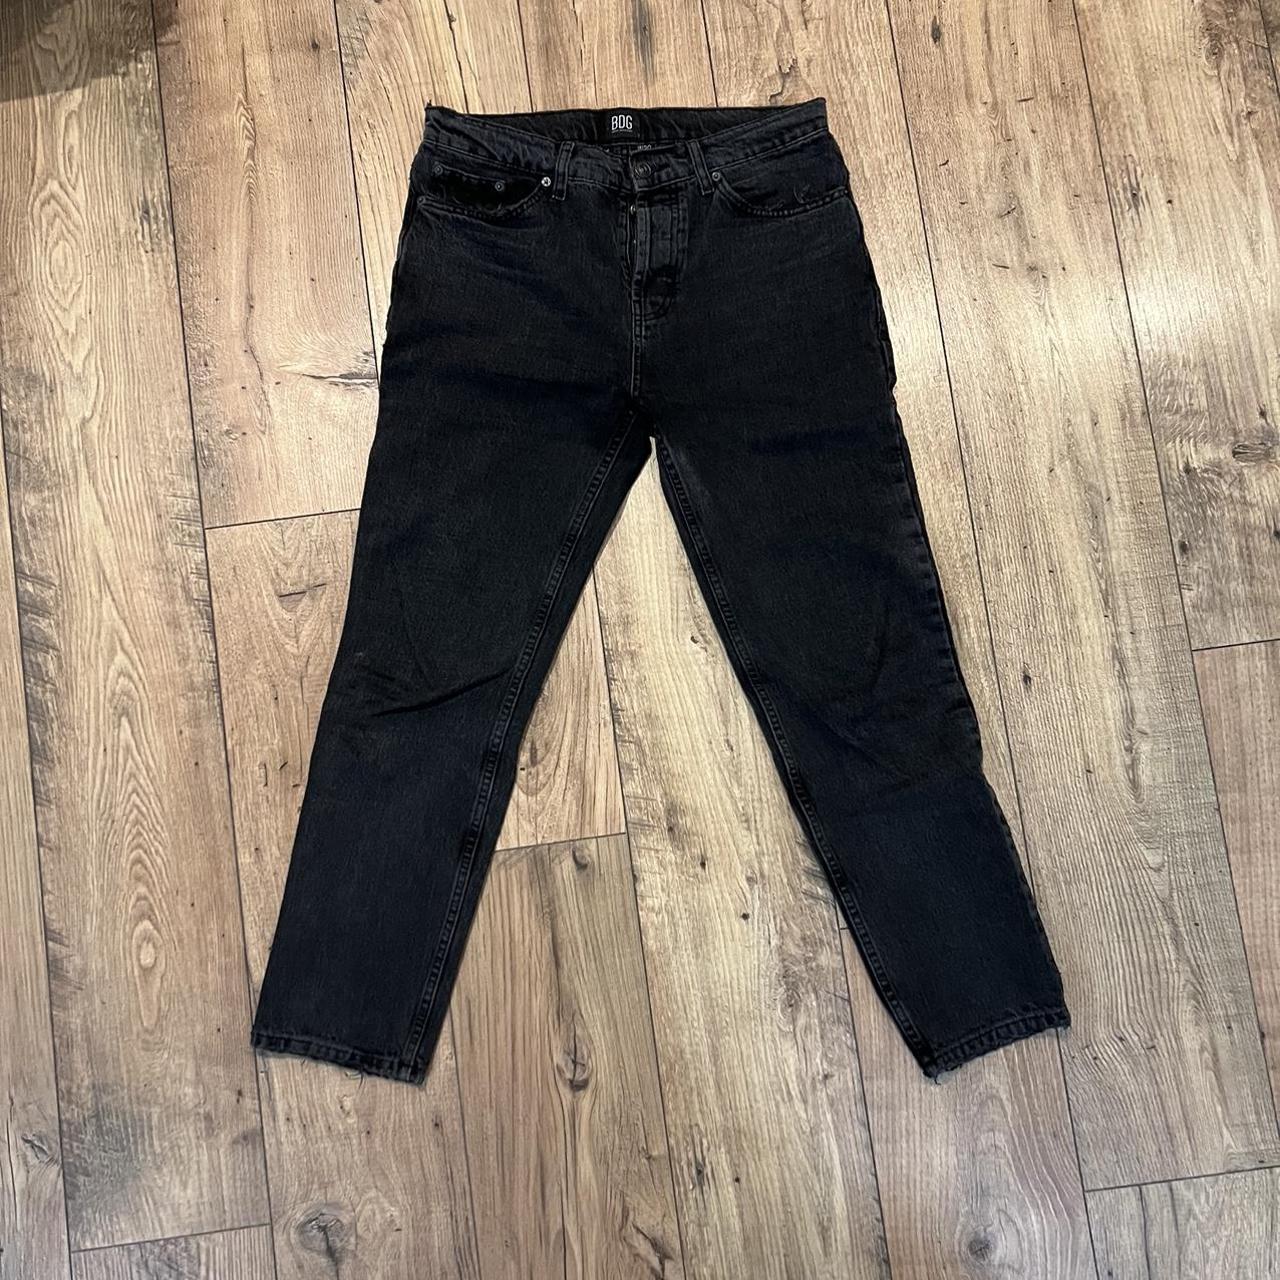 Urban Outfitters wash black jeans Slight... - Depop